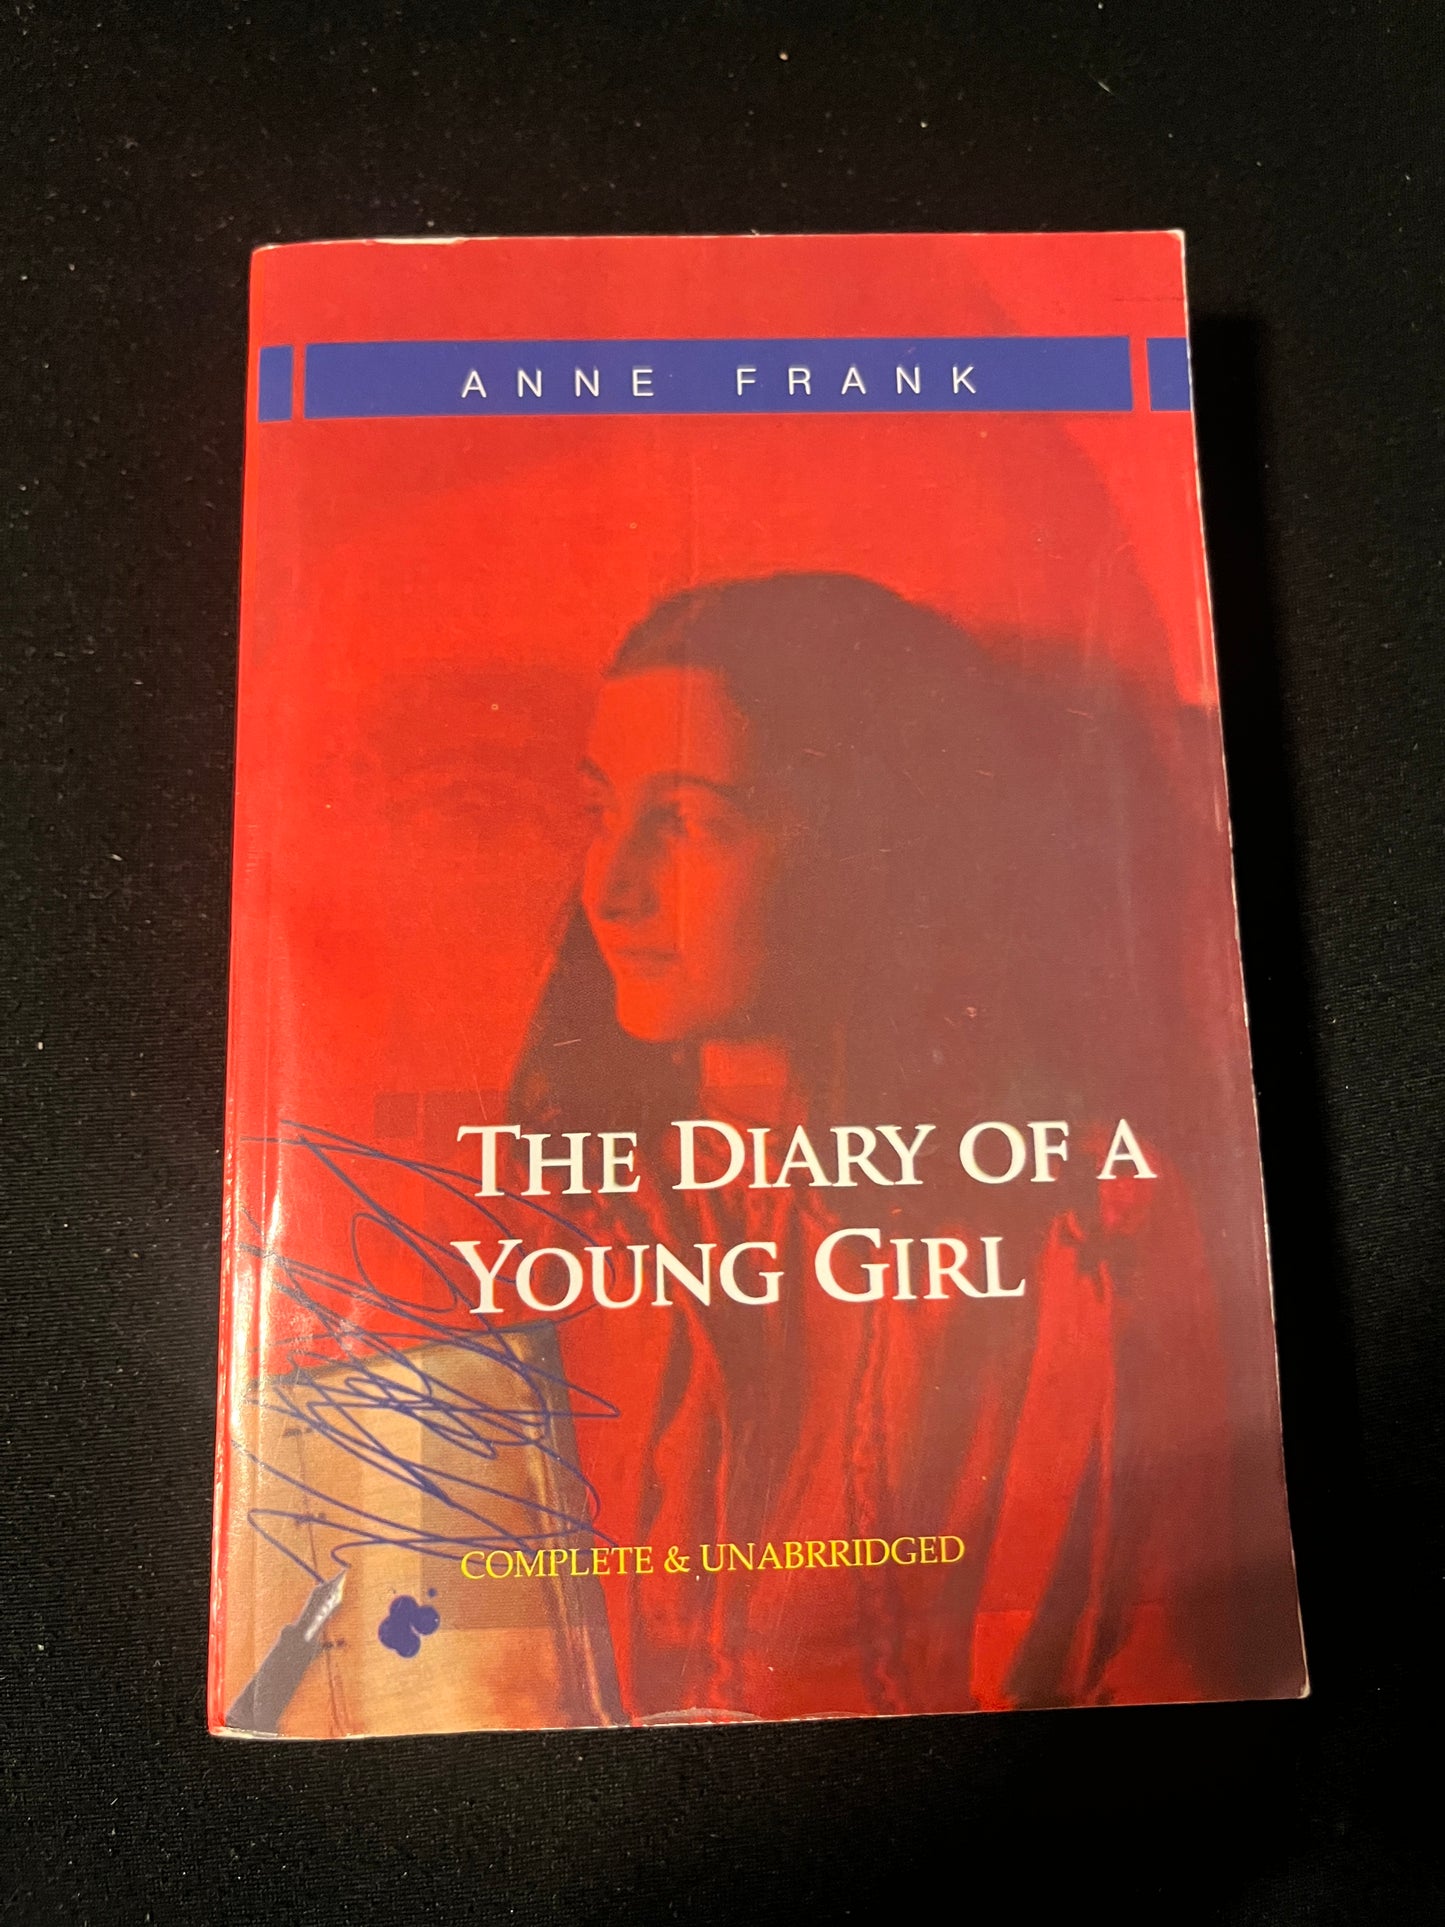 THE DIARY OF A YOUNG GIRL by Anne Frank